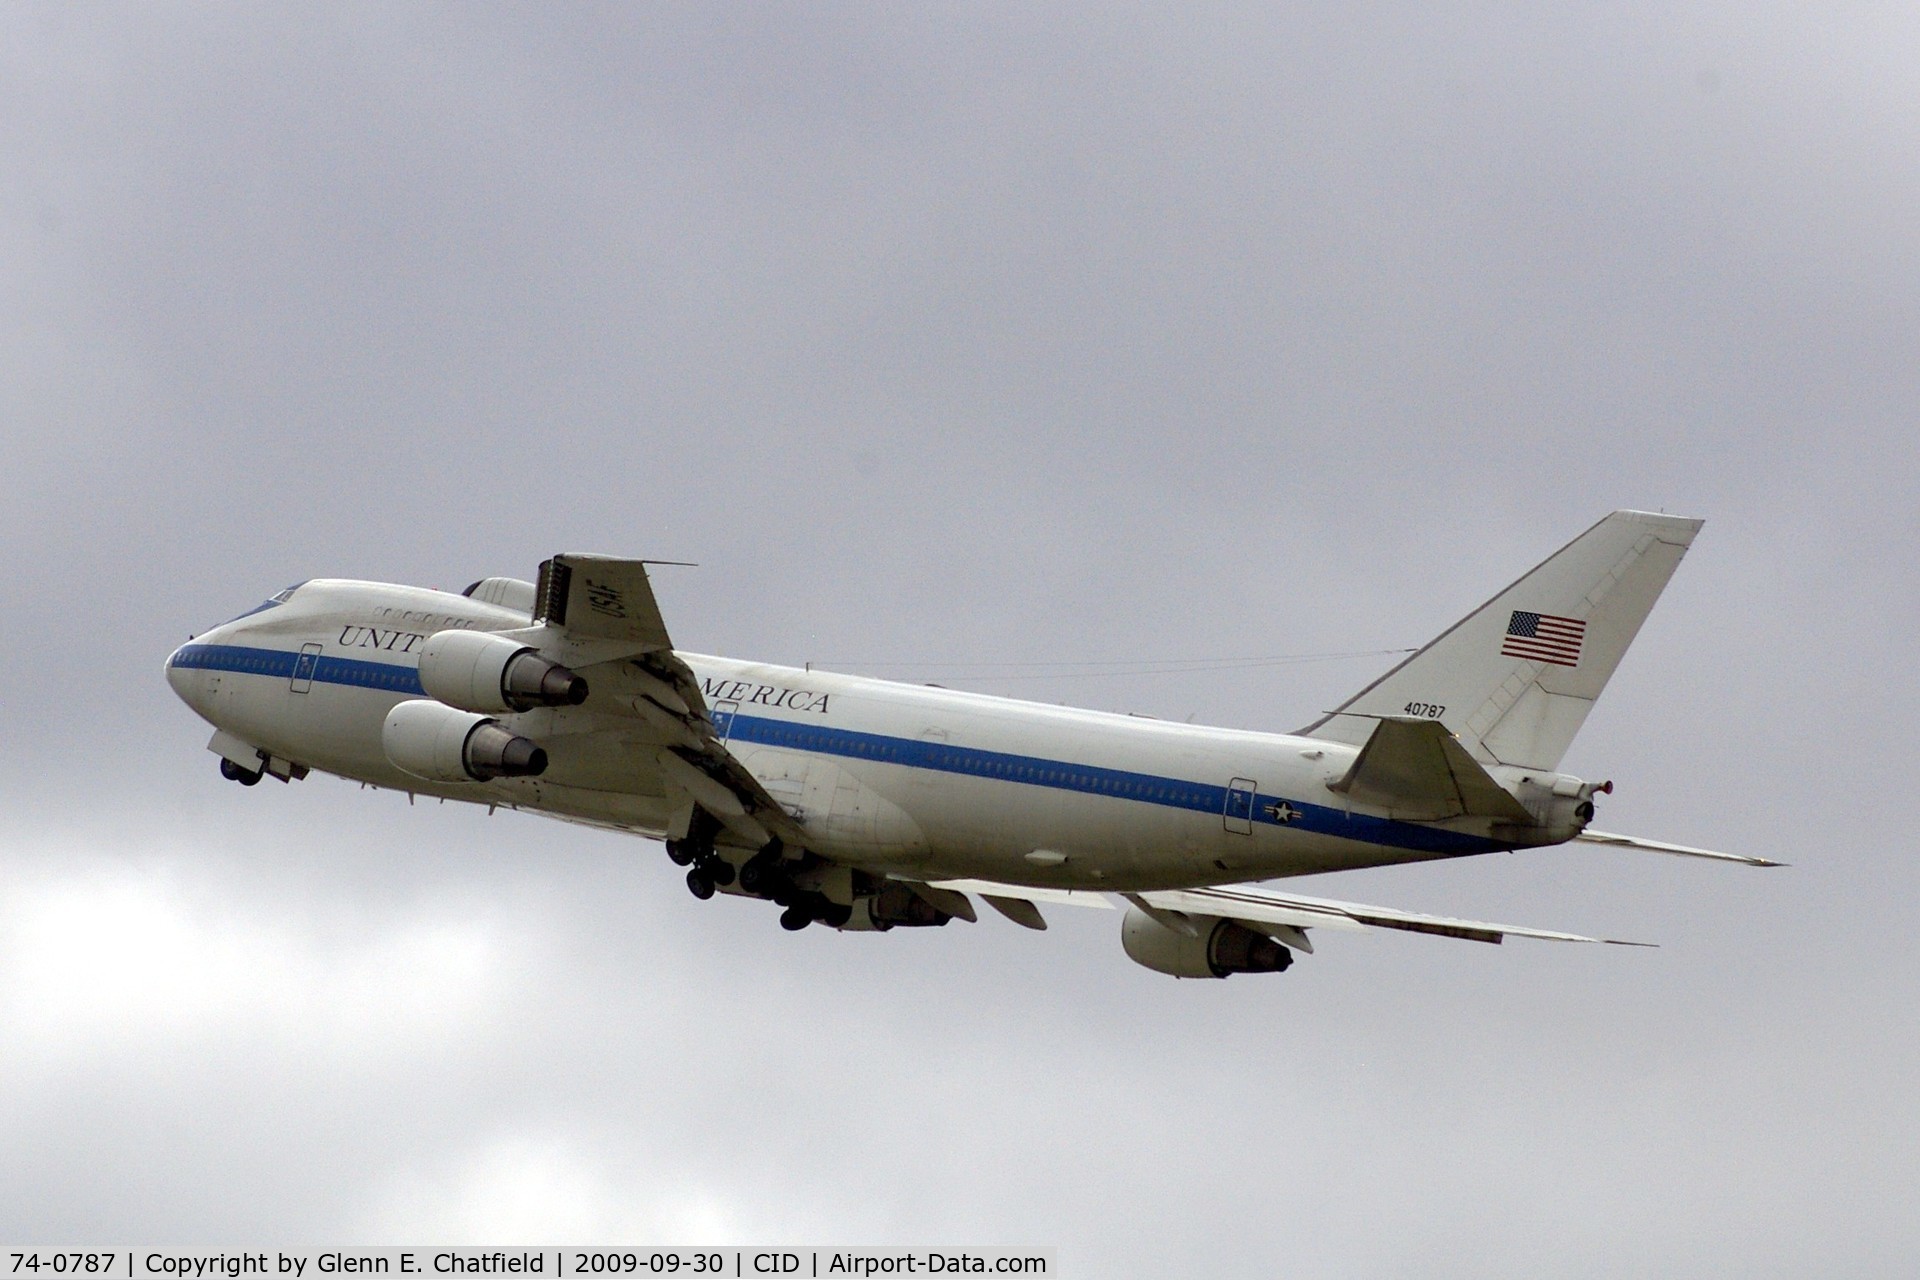 74-0787, 1974 Boeing E-4B C/N 20684, Fourth touch and go, shot from my office using 450mm